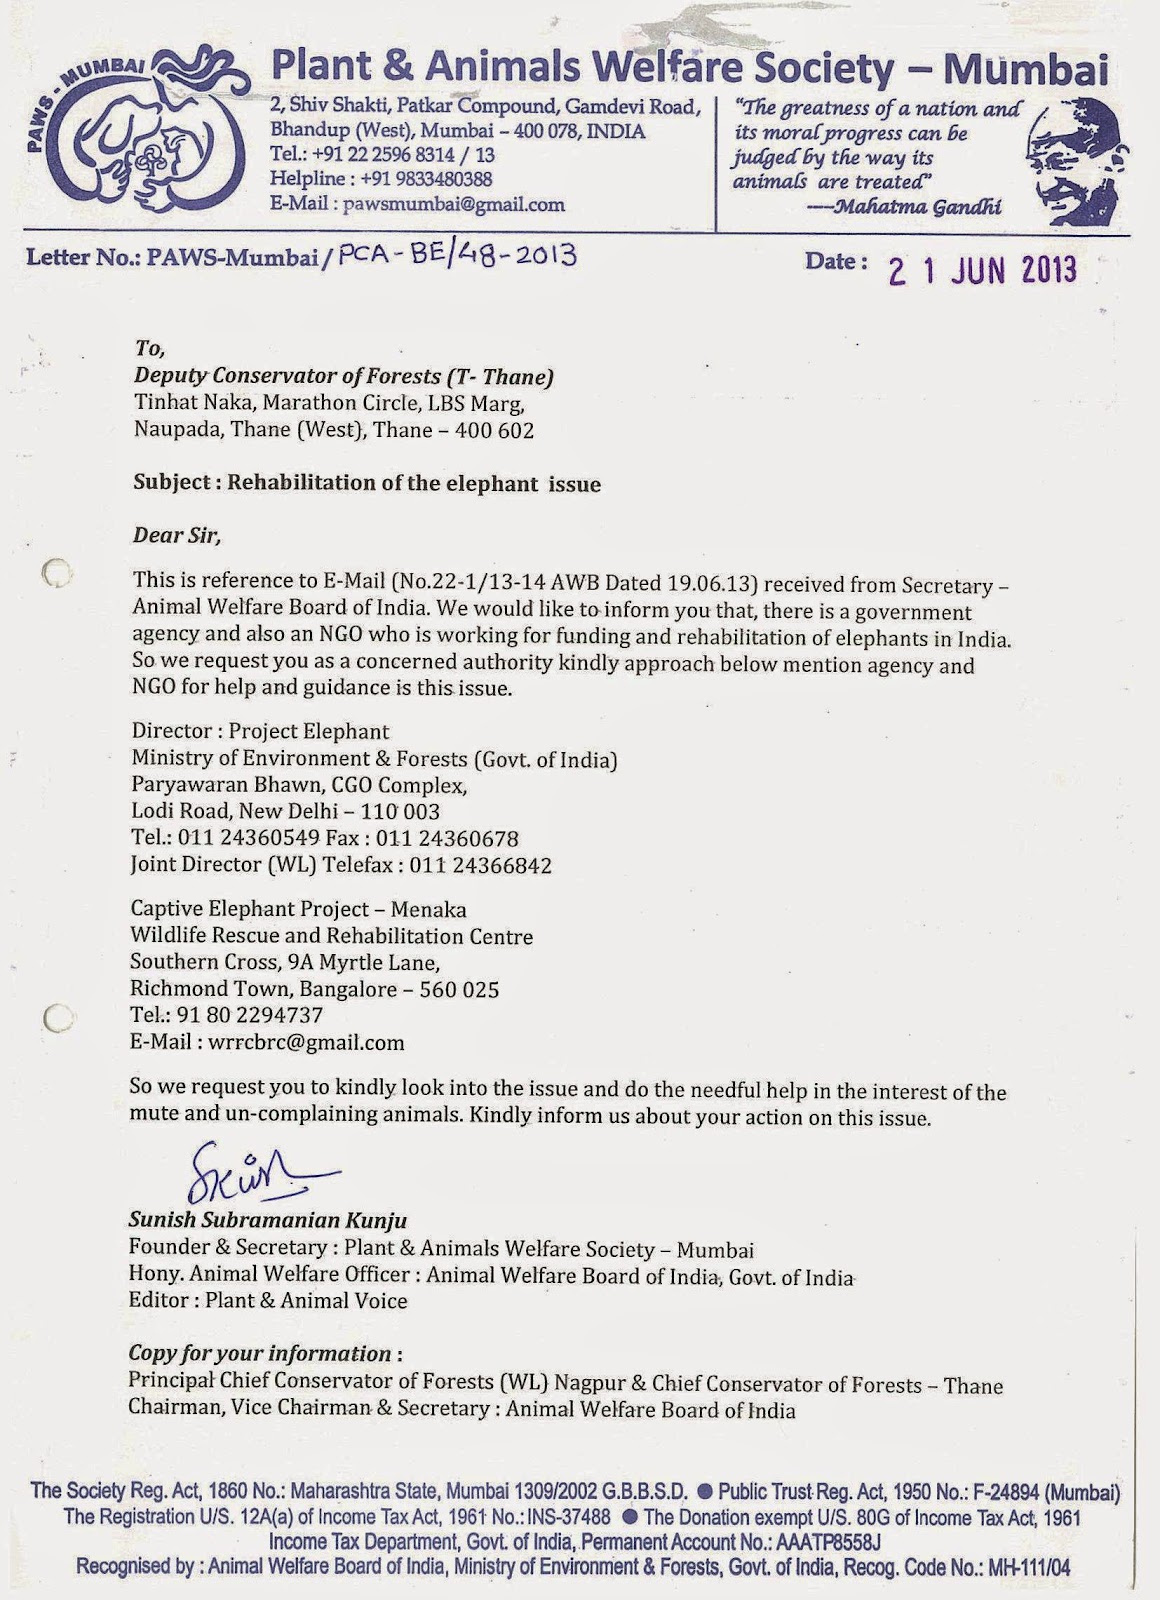 SAVE JUMBO: PAWS-Mumbai Letter to DCF Thane in regards to Rehabilitation of  the elephant issue